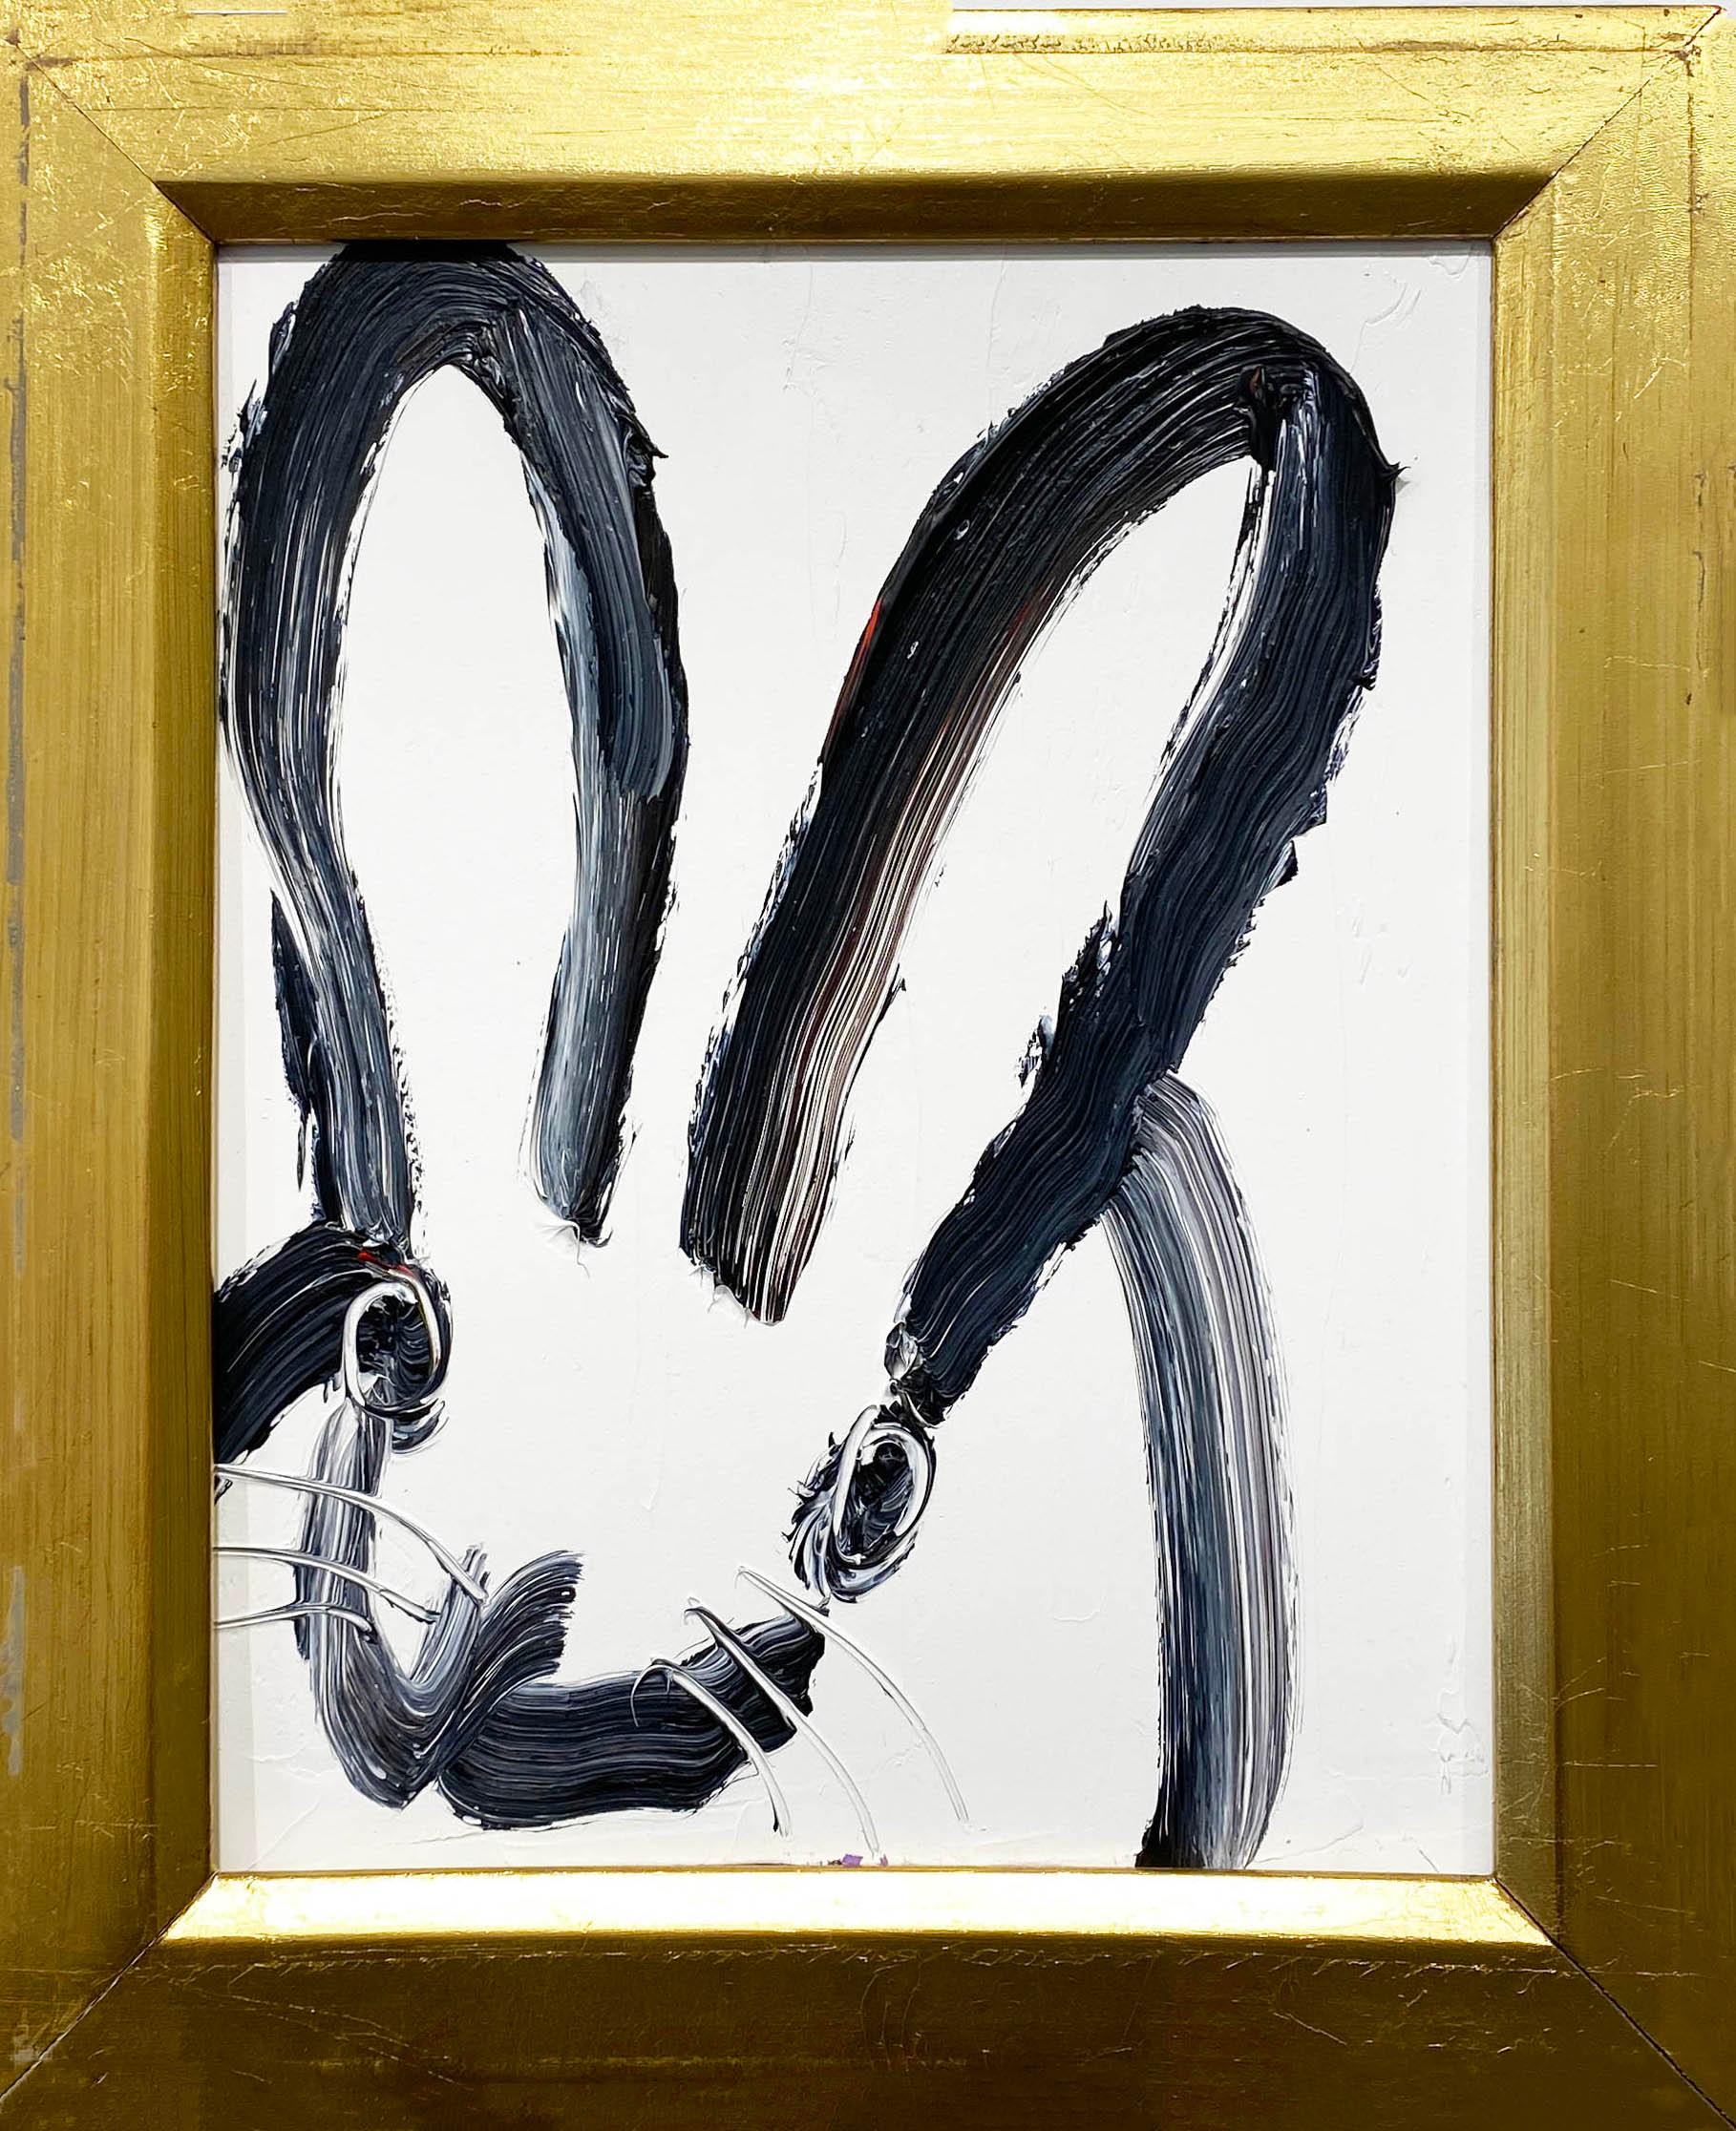 Hunt Slonem bunny oil painting 'Anthony' 2024. Oil on wood, 10 x 8 in. / Frame: 12 x 10 in. This painting features Slonem's signature bunny outlined in black over a white background. Includes a handpicked, antique wood frame.

Considered one of the